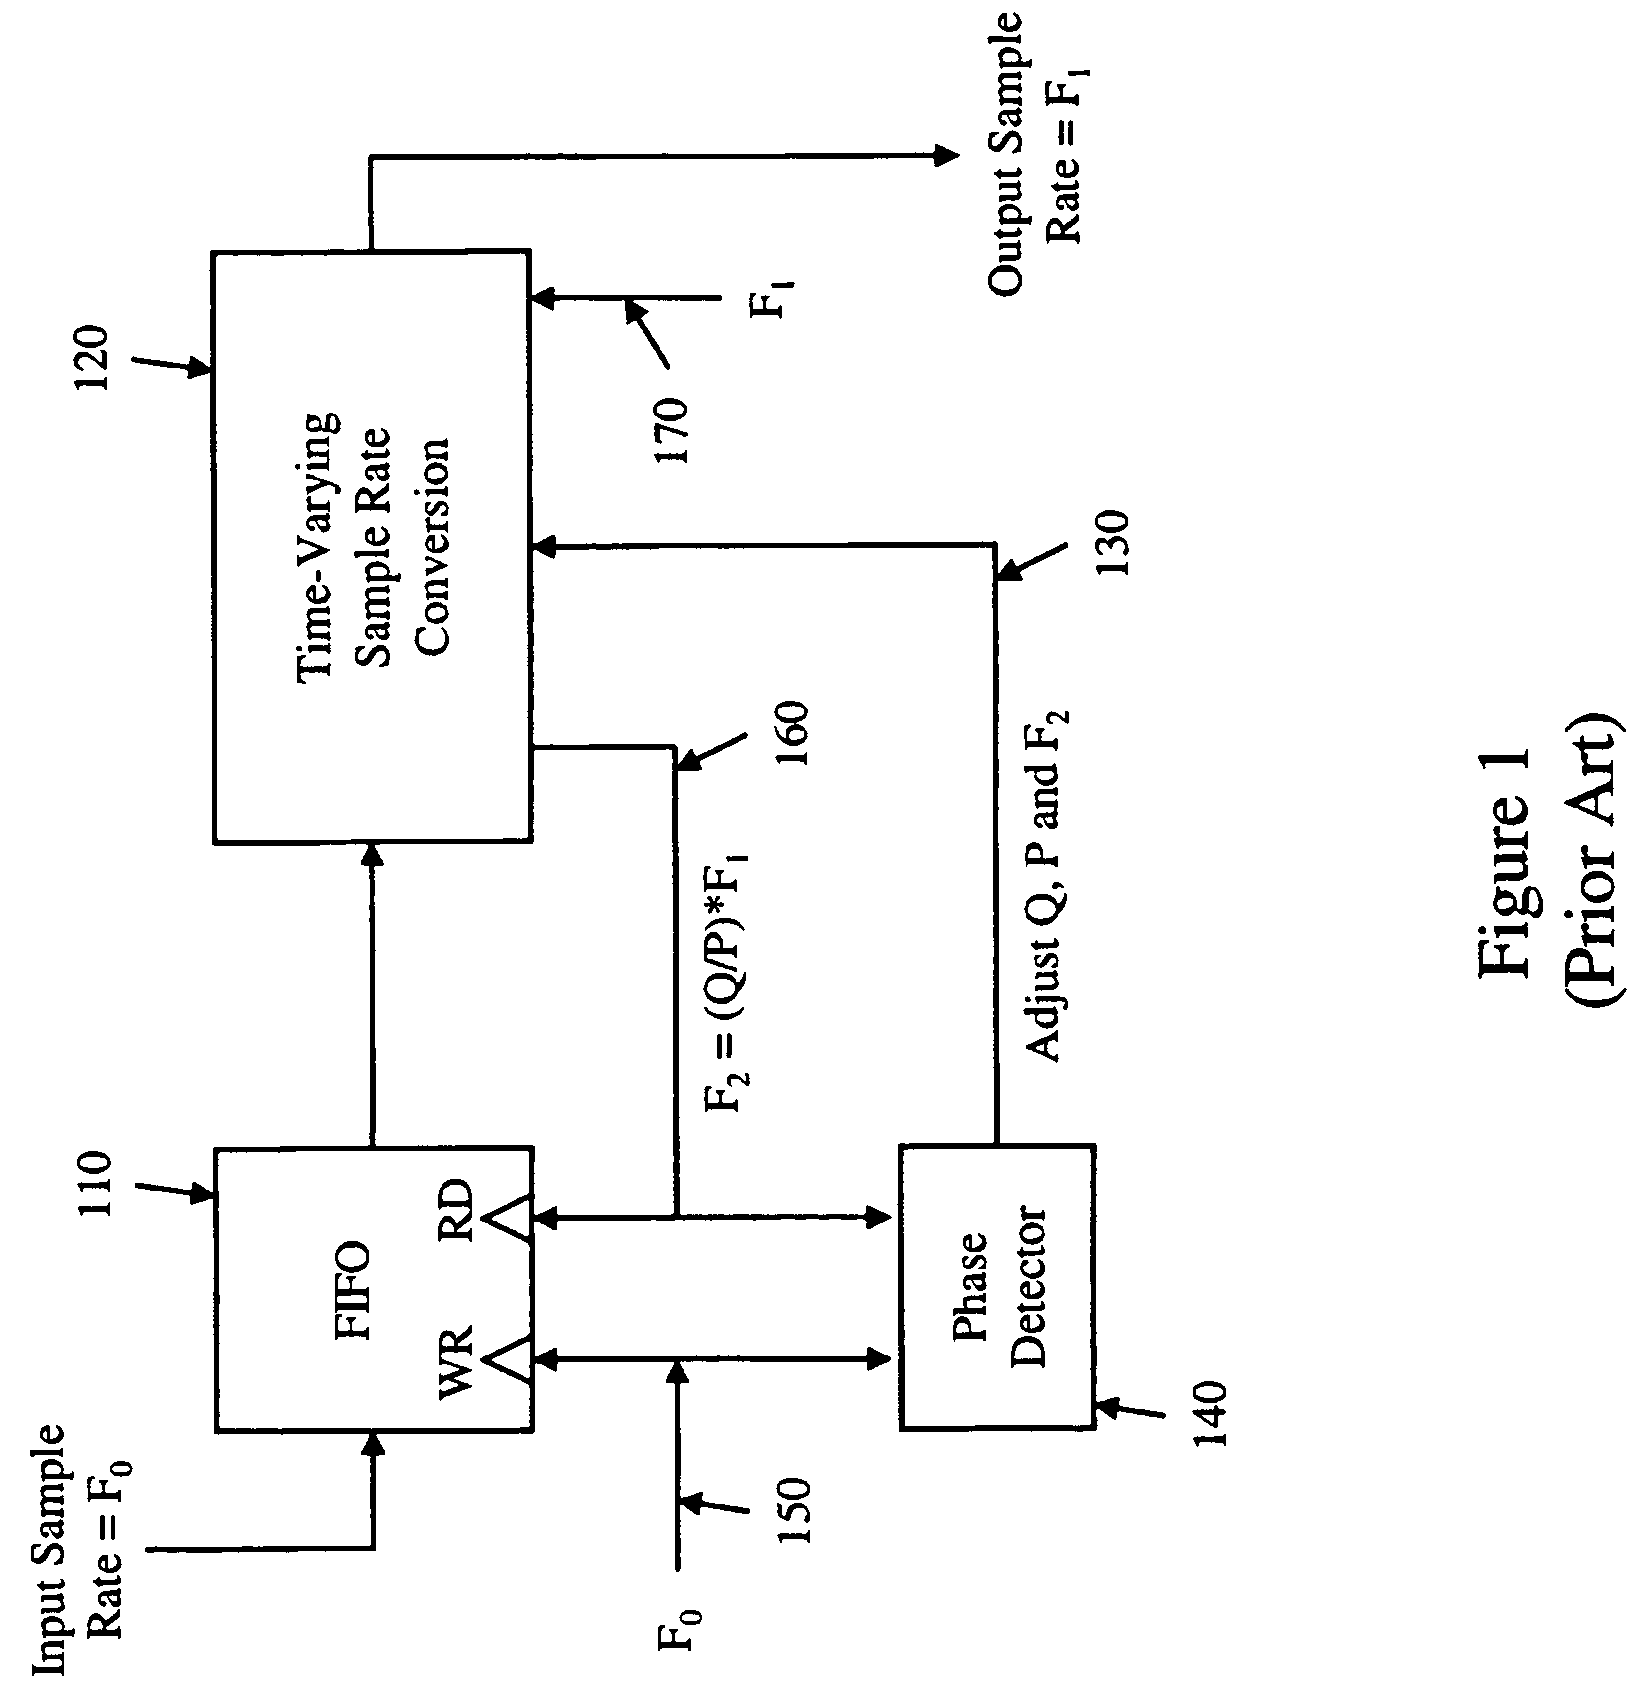 Methods and systems for sample rate conversion and sample clock synchronization